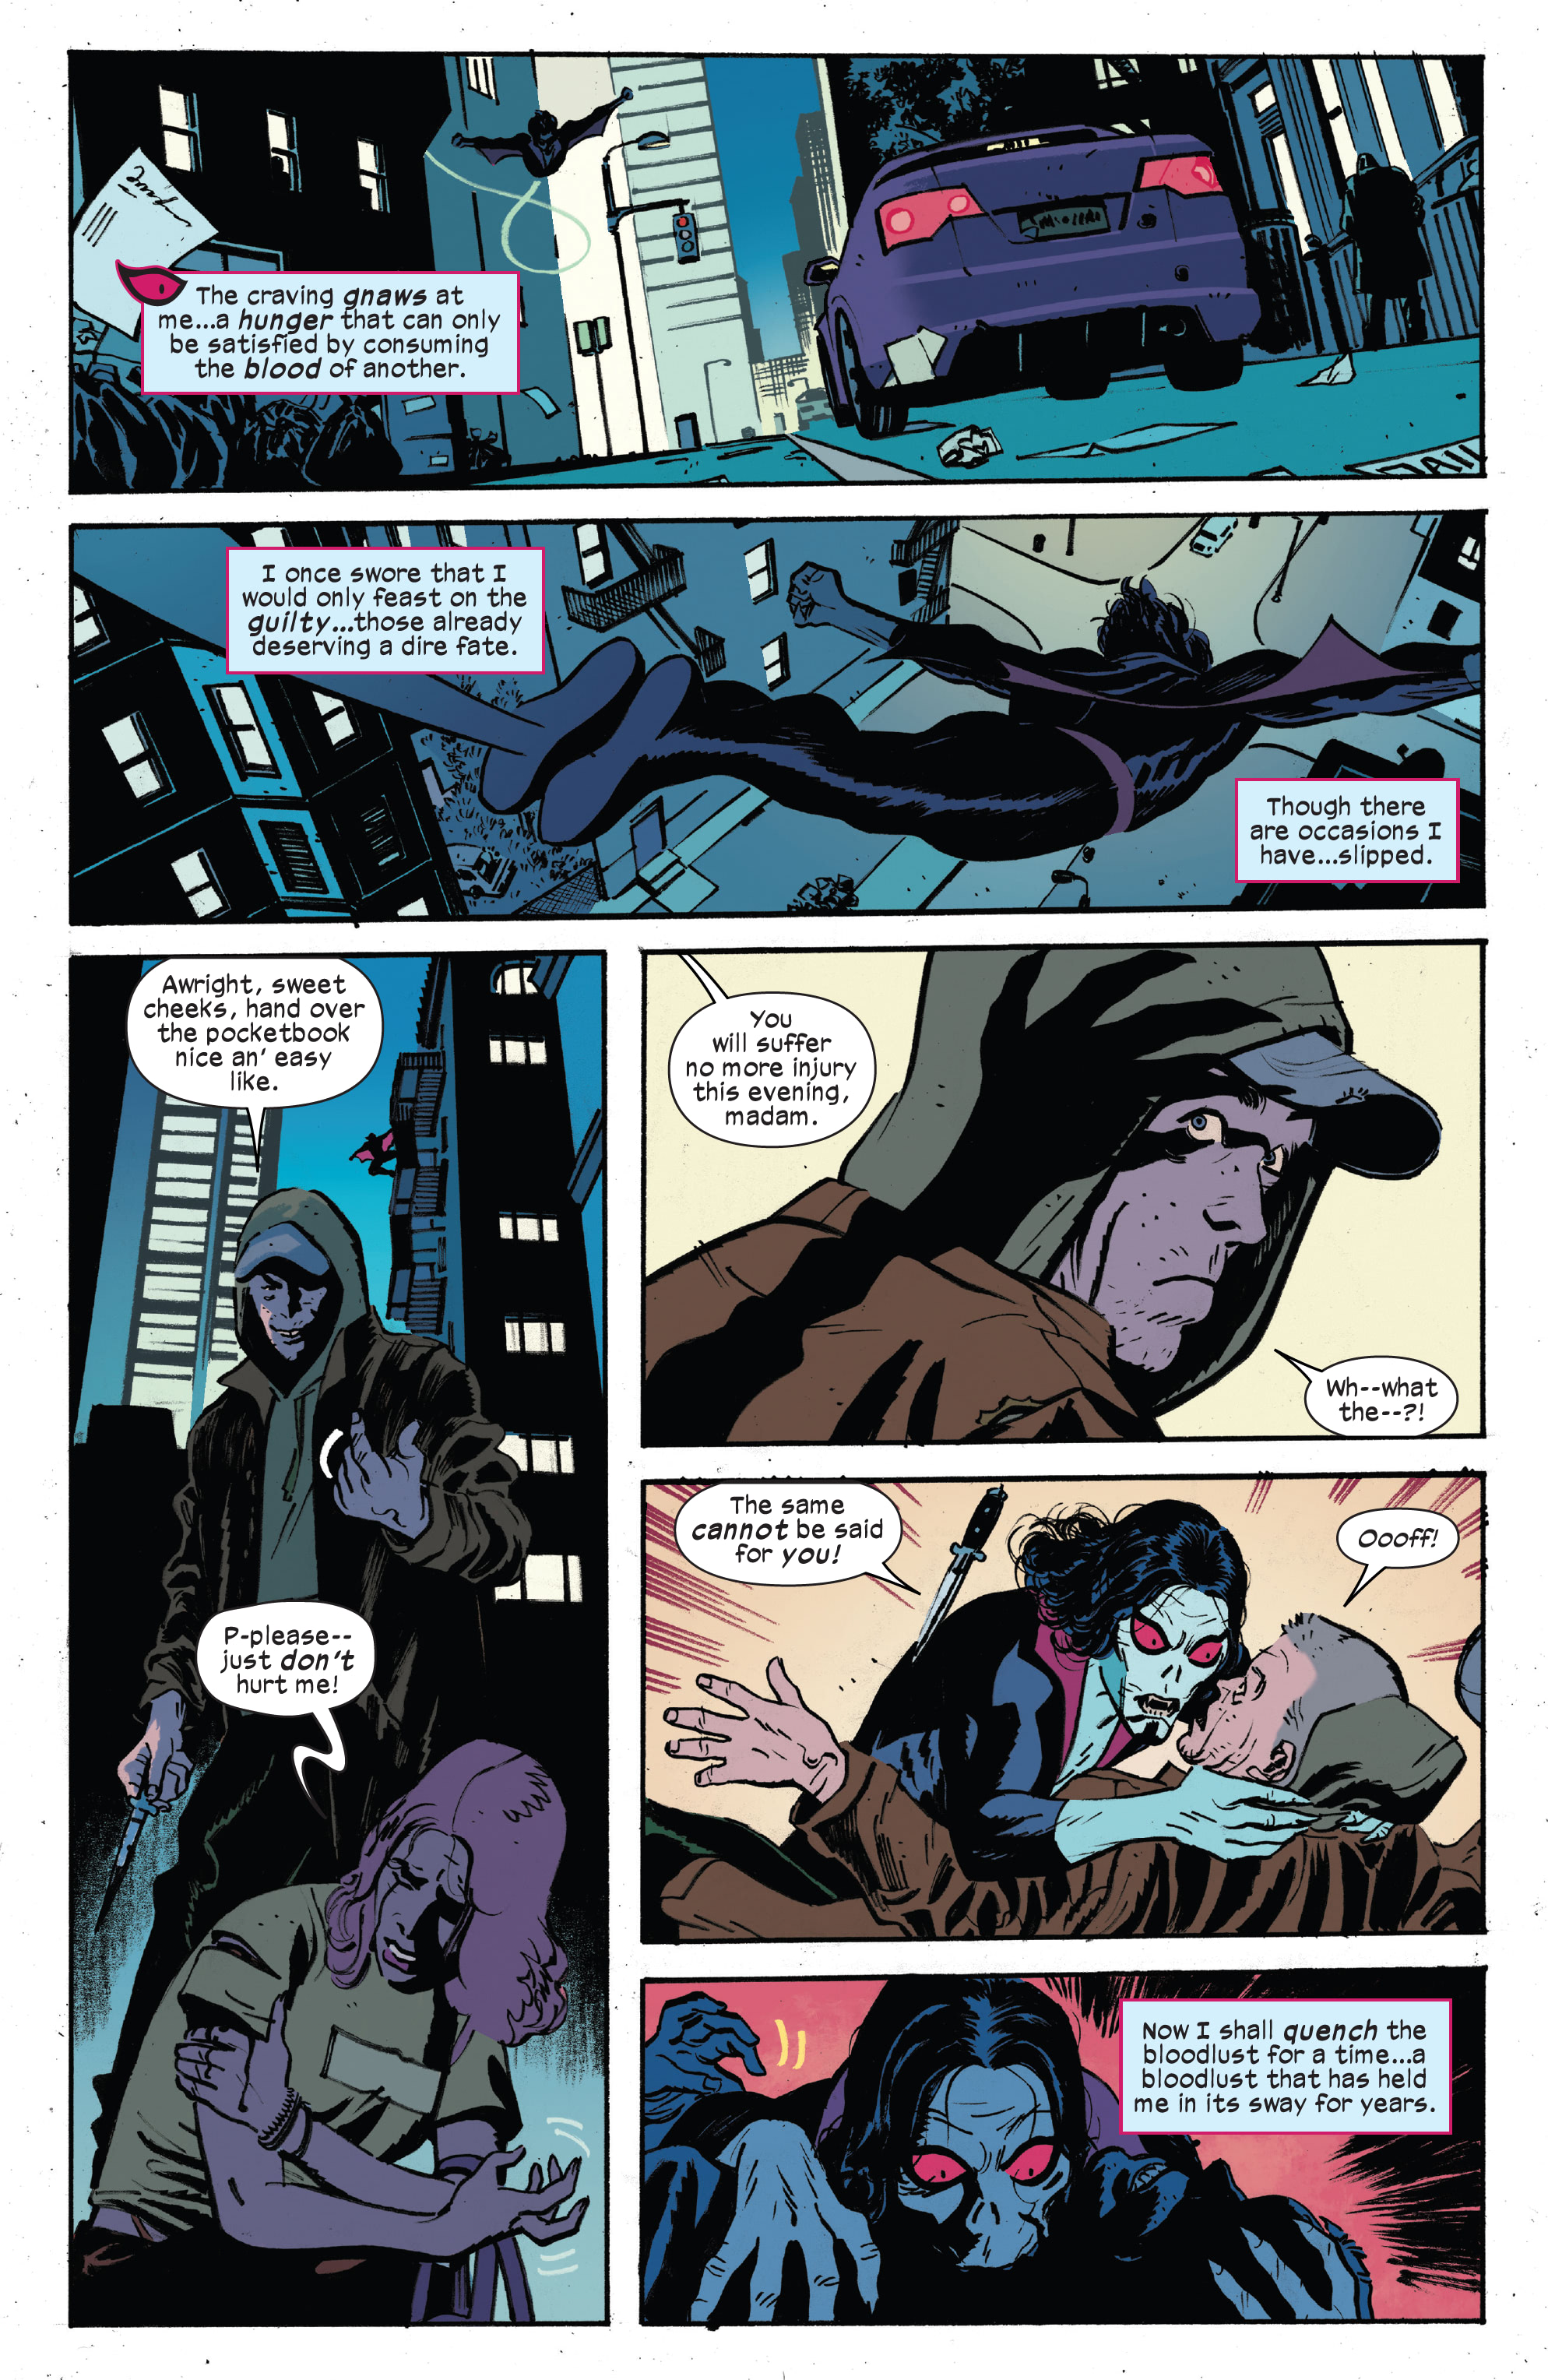 Morbius: Bond Of Blood (2021): Chapter 1 - Page 4